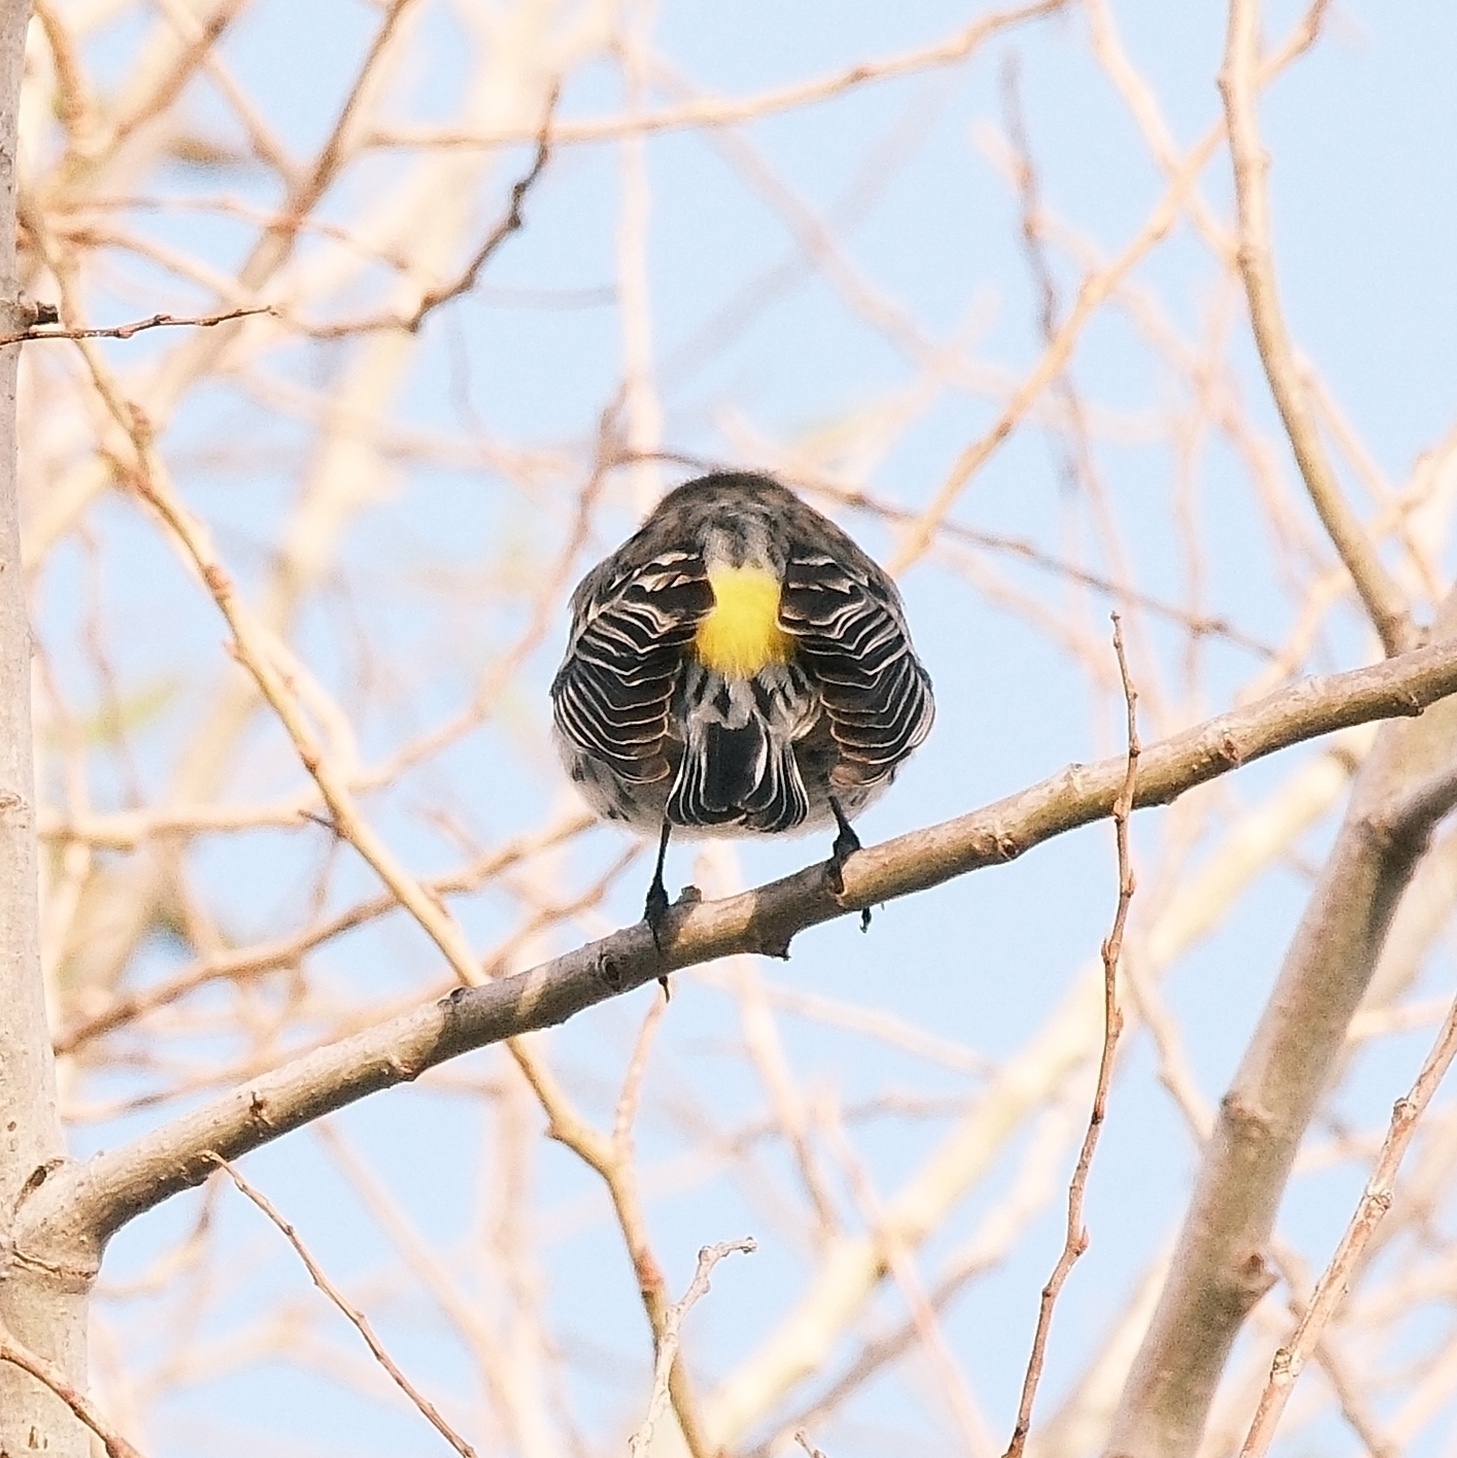 the yellow patch on the rump of the Yellow Rumped Warbler faces directly at the phonographer. The bird is perched on a defoliated branch and the sky is overcast.